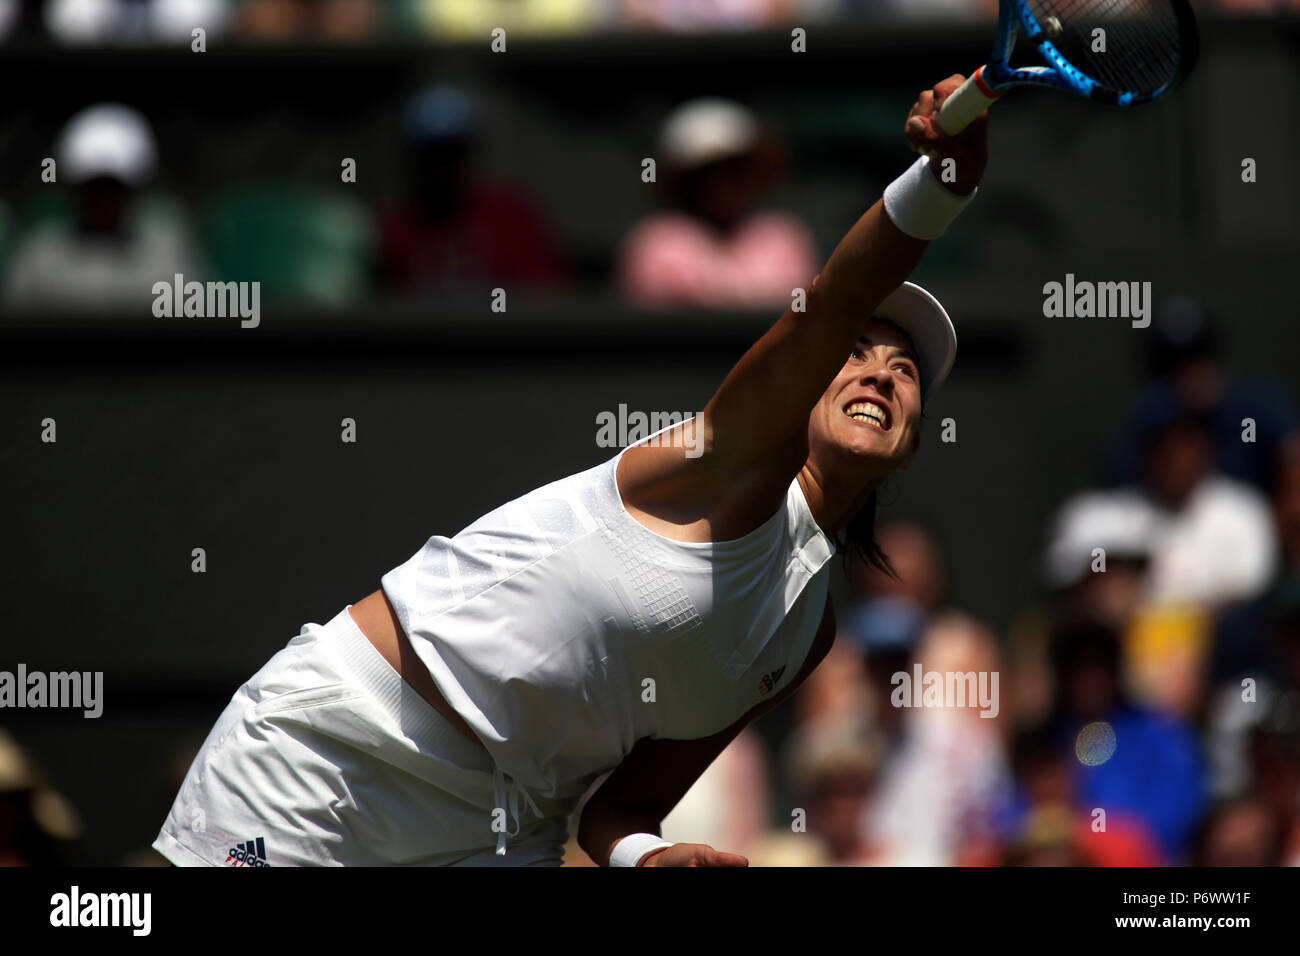 London, England - July 3rd, 2018.  Garabine Muguruza of Spain in action against Naomi Broady of Great Britain in first round action at Wimbledon today. Credit: Adam Stoltman/Alamy Live News Stock Photo